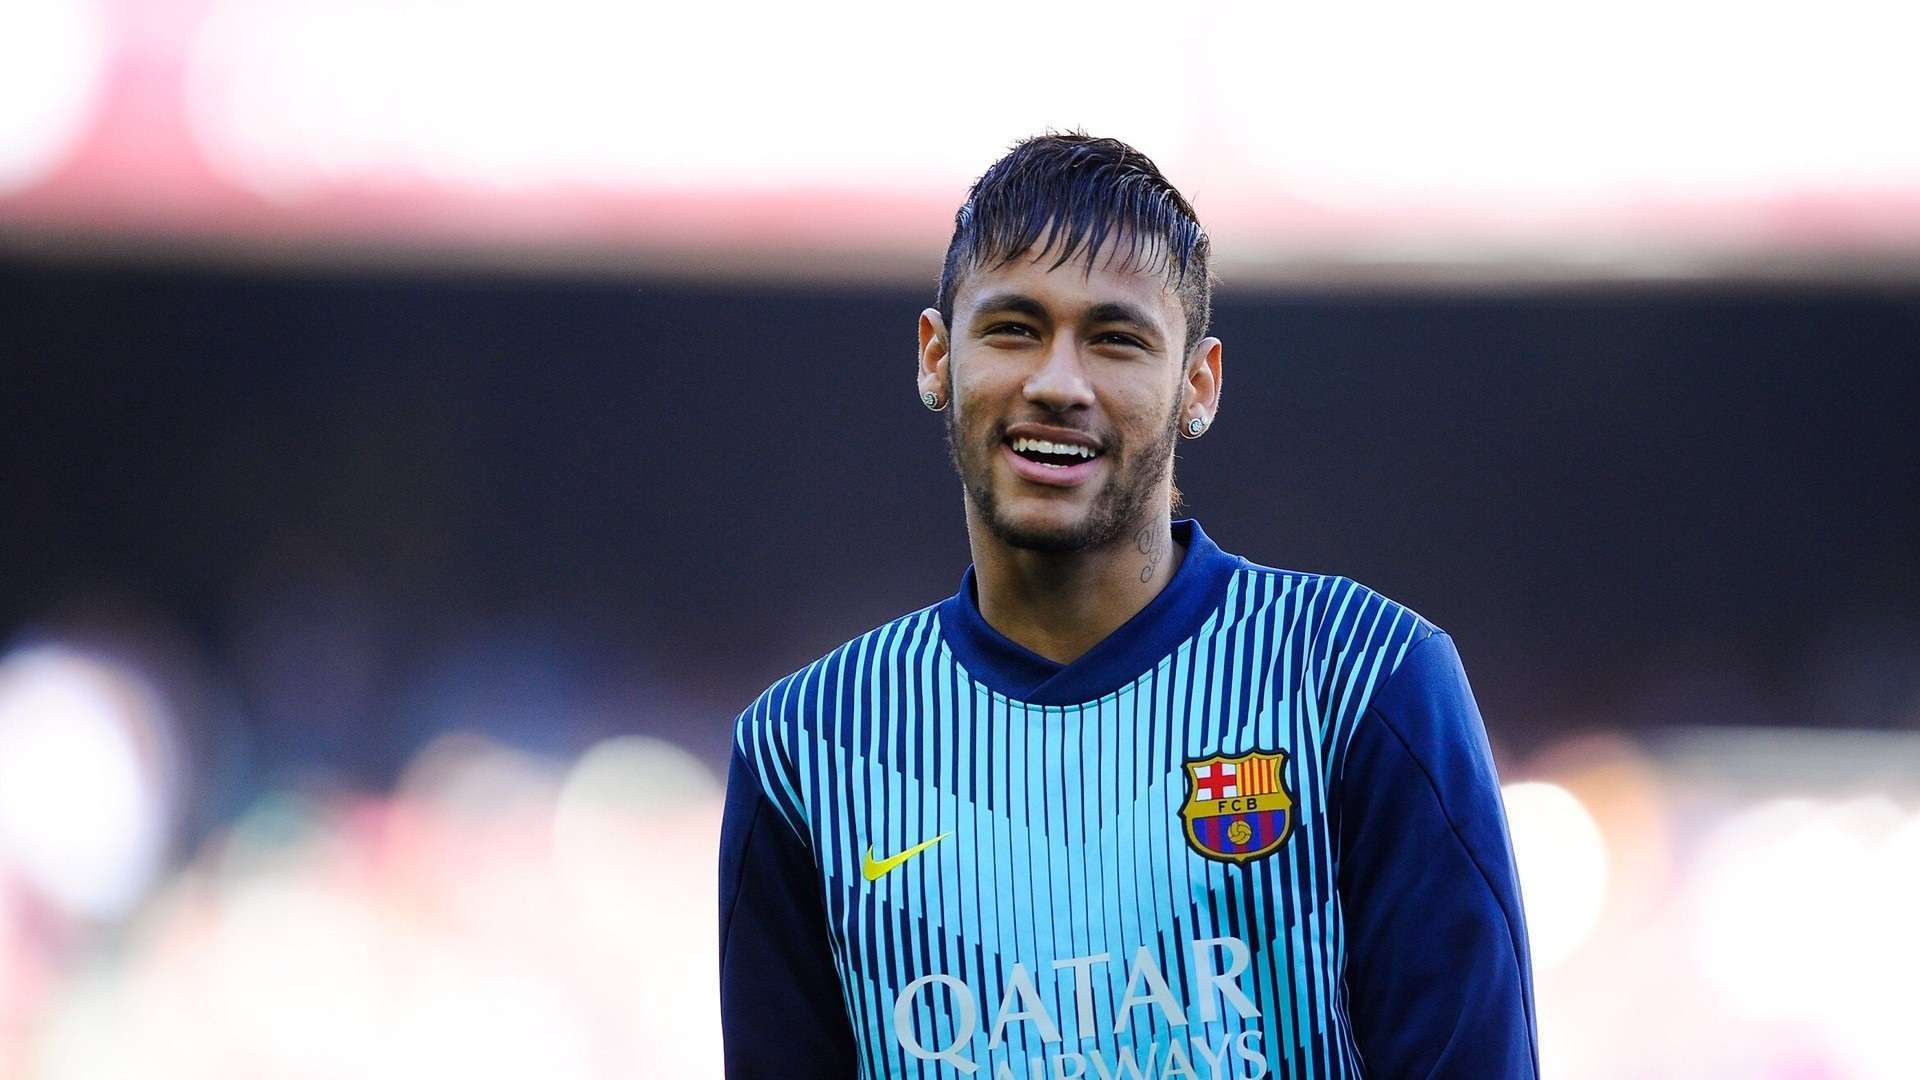 Top12 Neymar New HD Wallpaper And Latest Photo Gallery